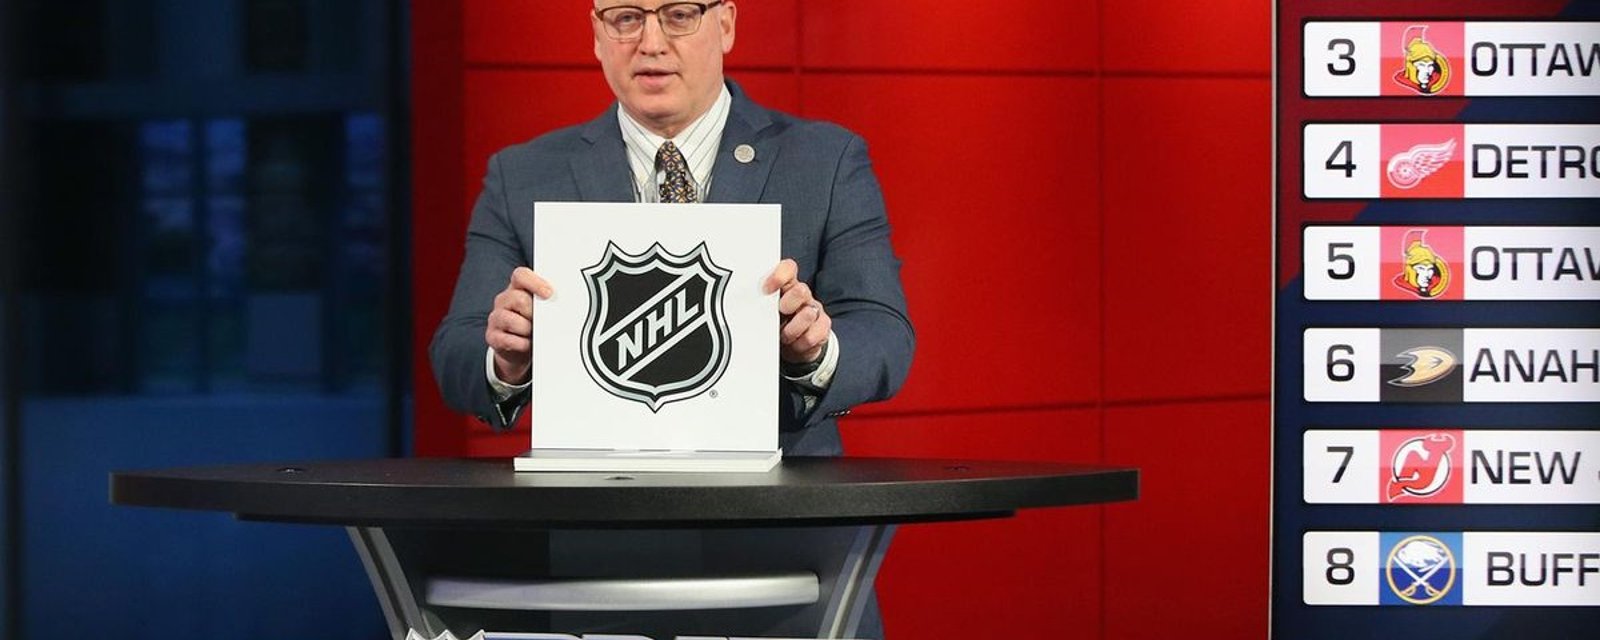 NHL announces Draft Lottery odds for all 16 eliminated teams.